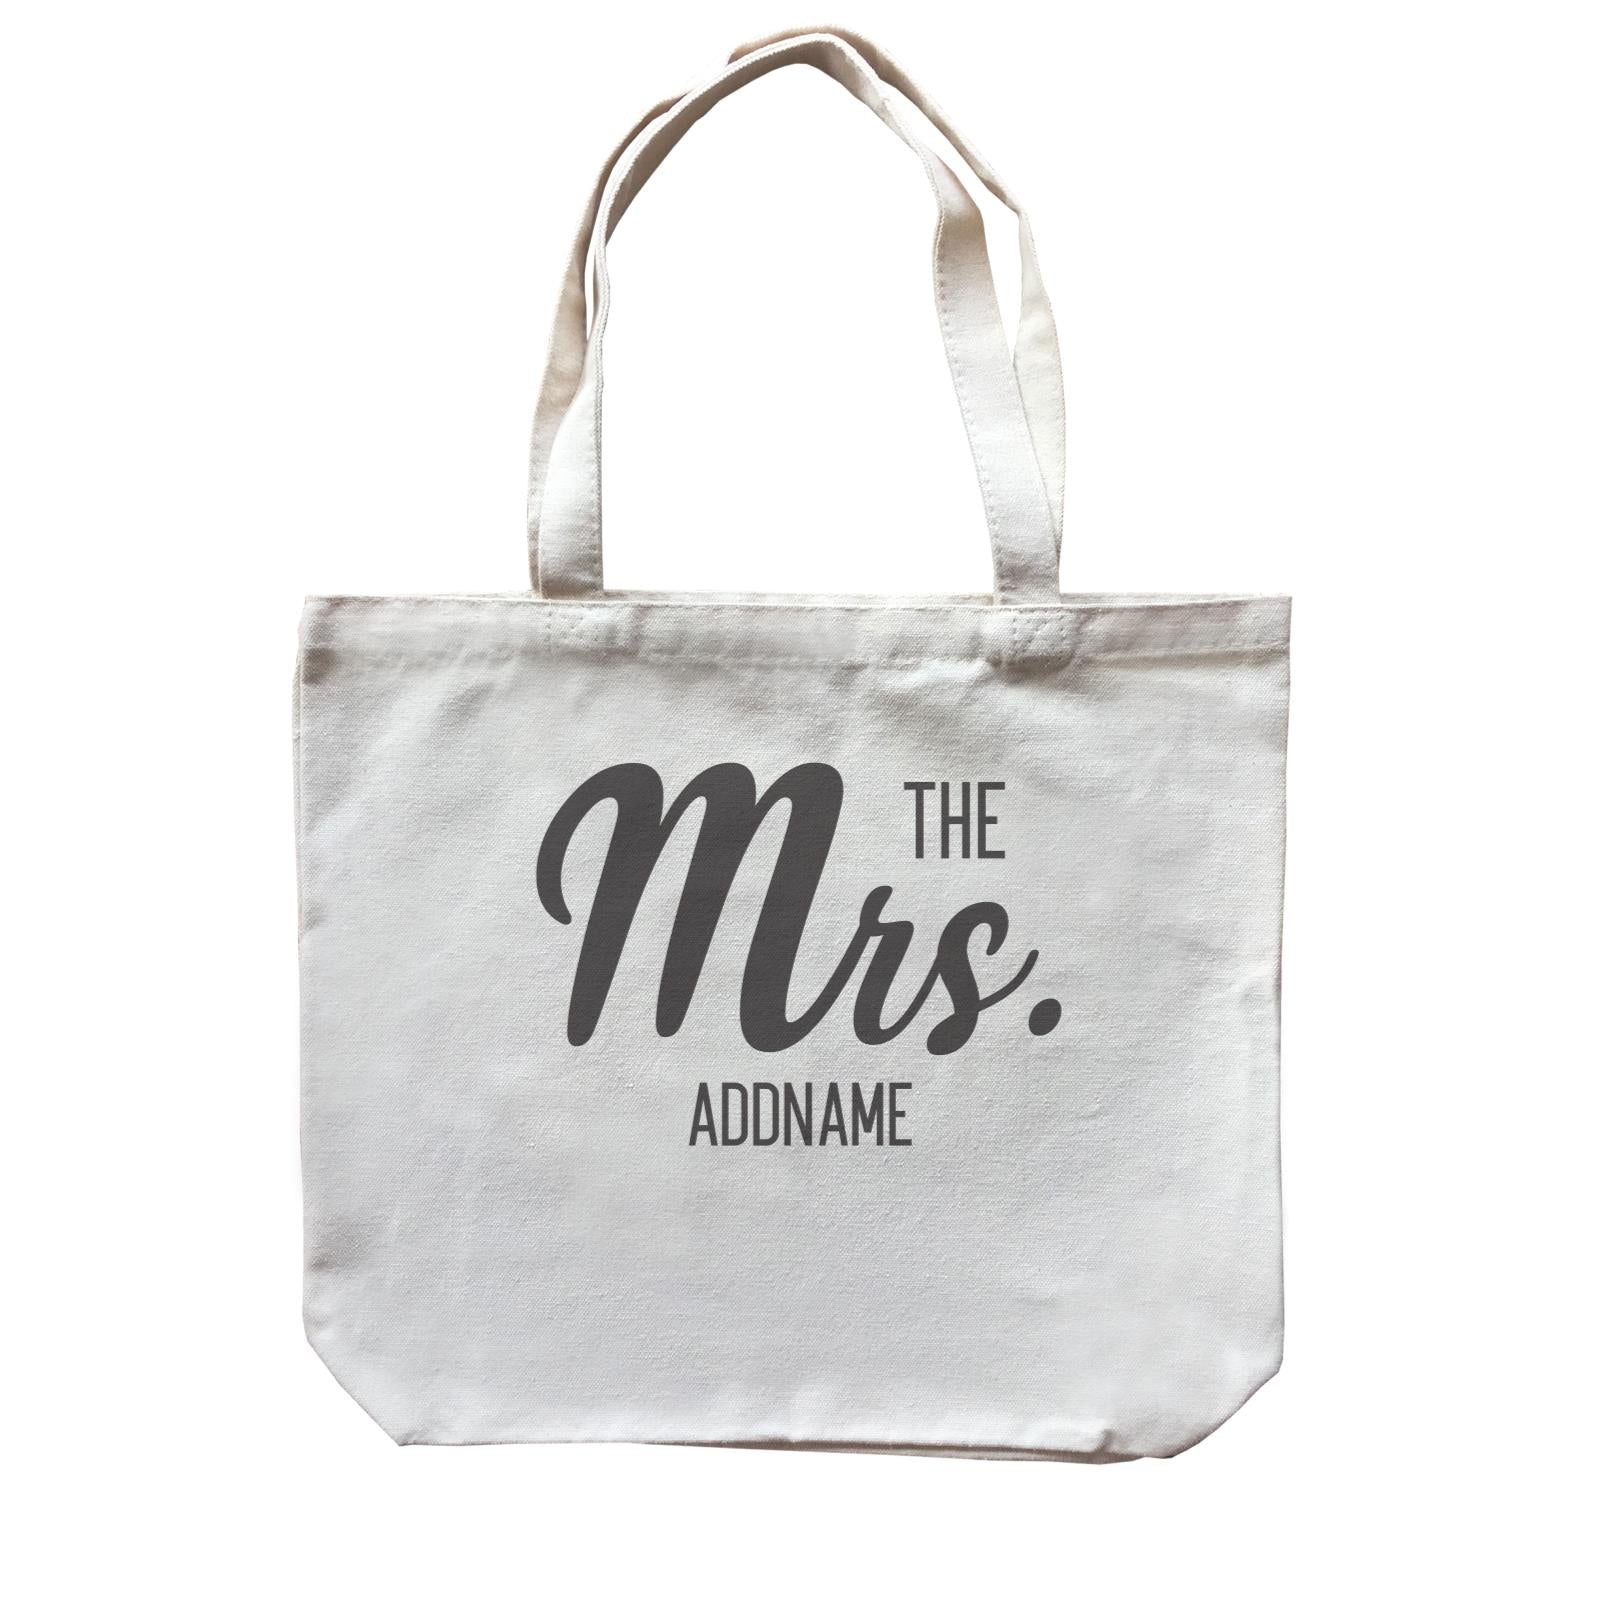 Husband and Wife The Mrs. Addname Canvas Bag